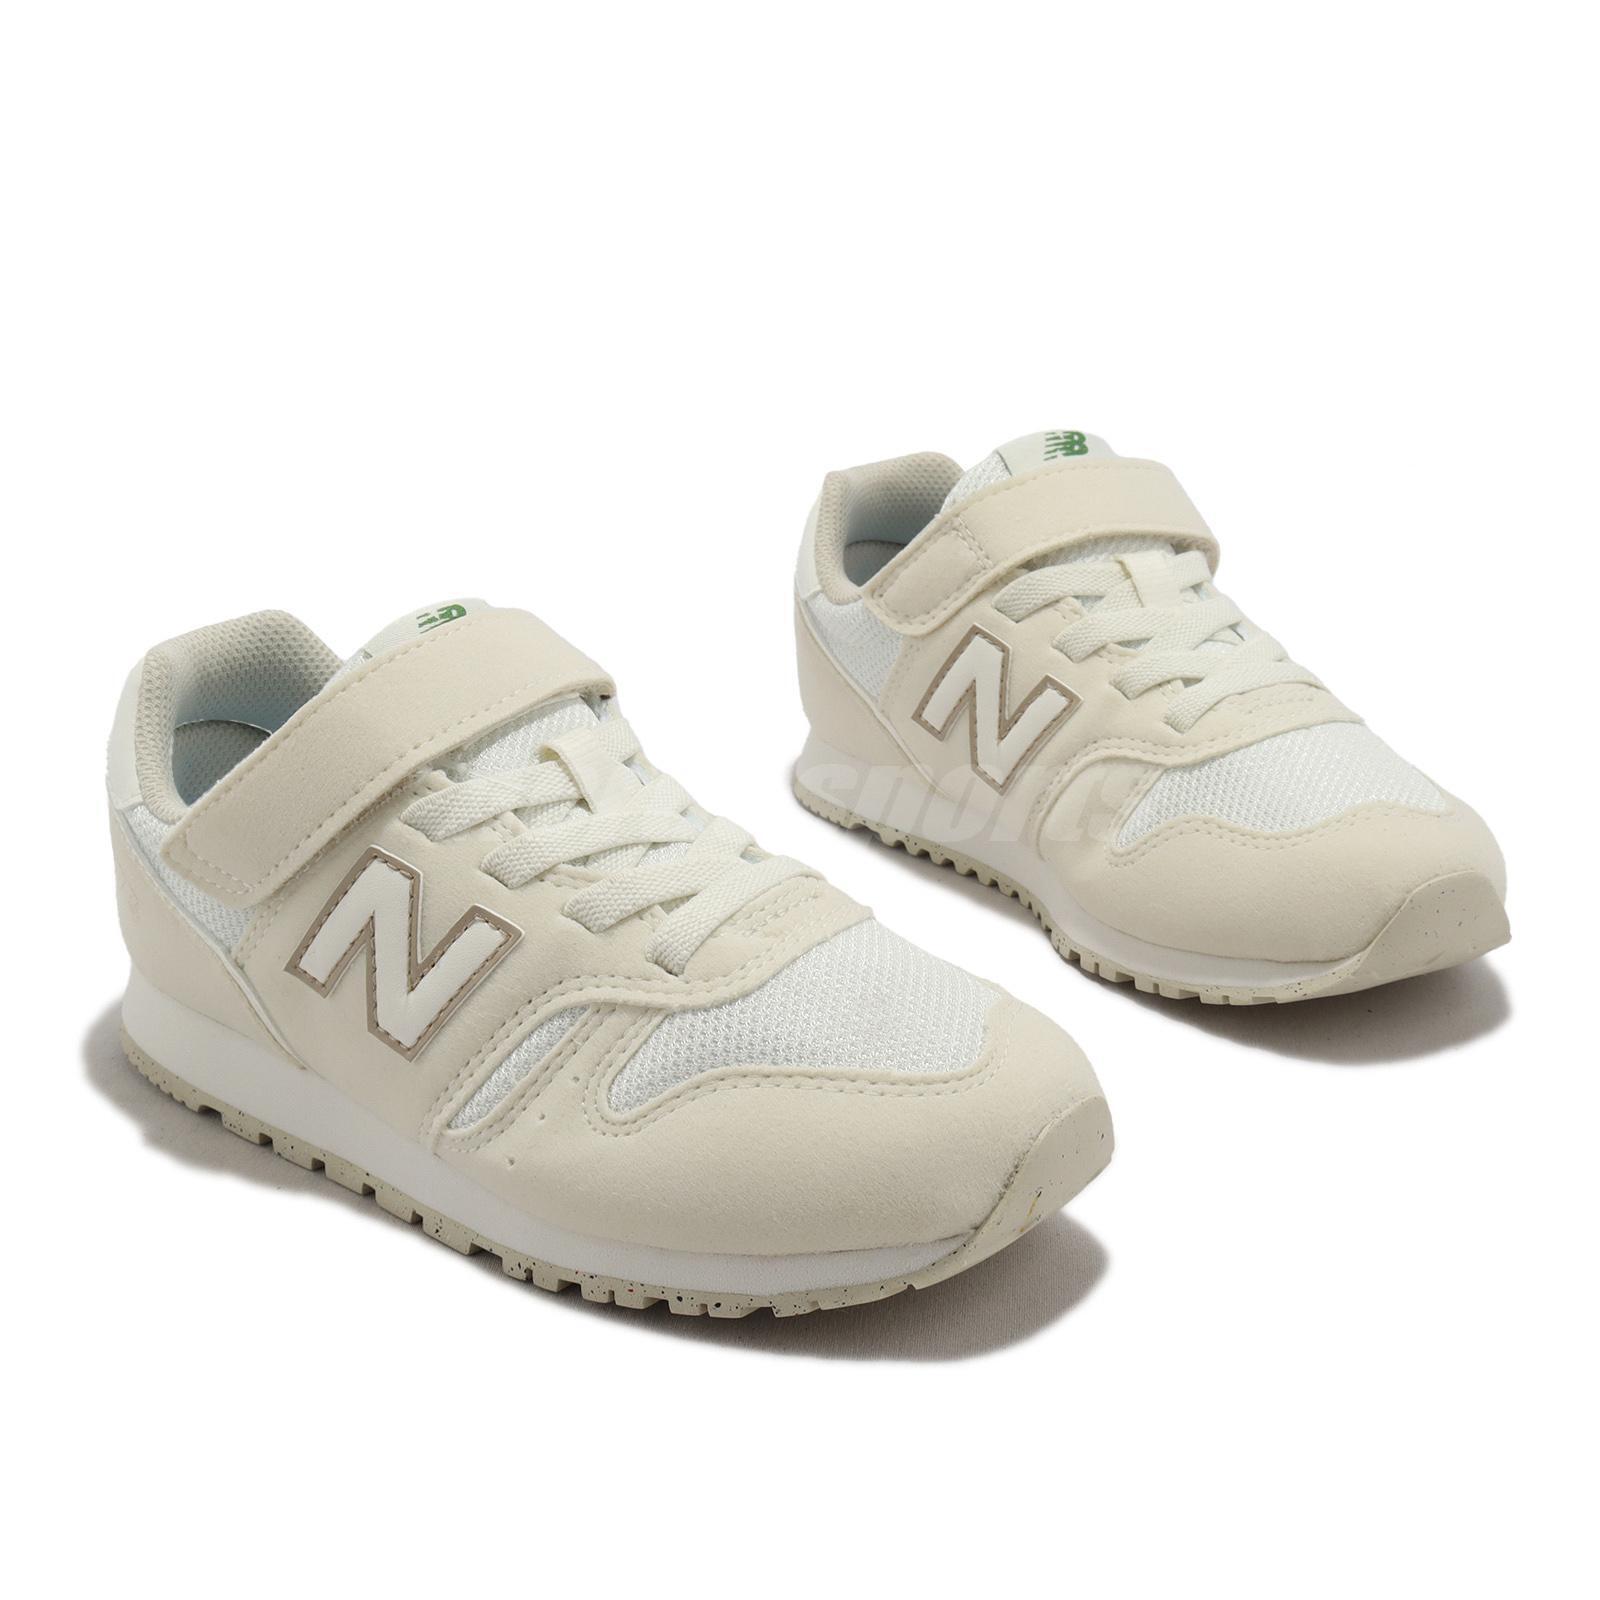 NB LIFESTYLE-SHOES YOUTH TURTLEDOVE